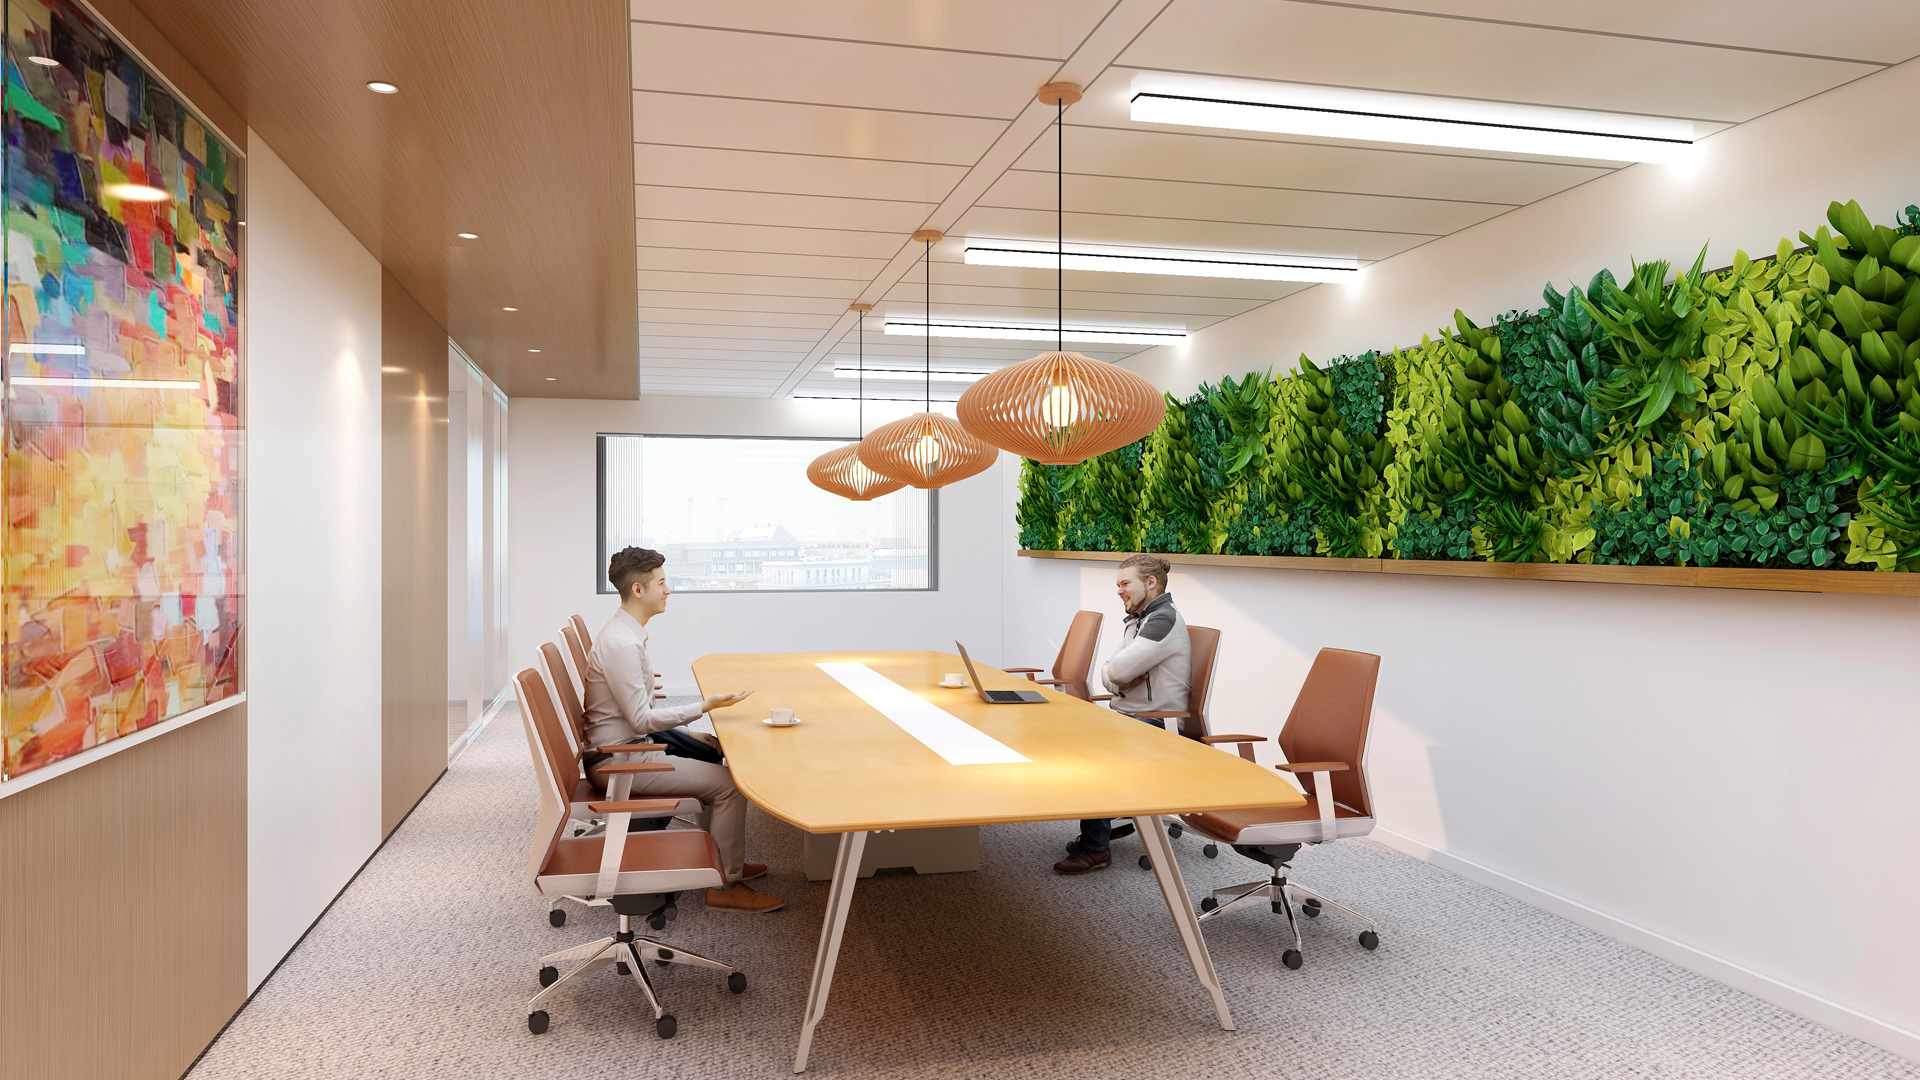 6 Ideas to Design Offices for a Sensory Experience_2.jpg